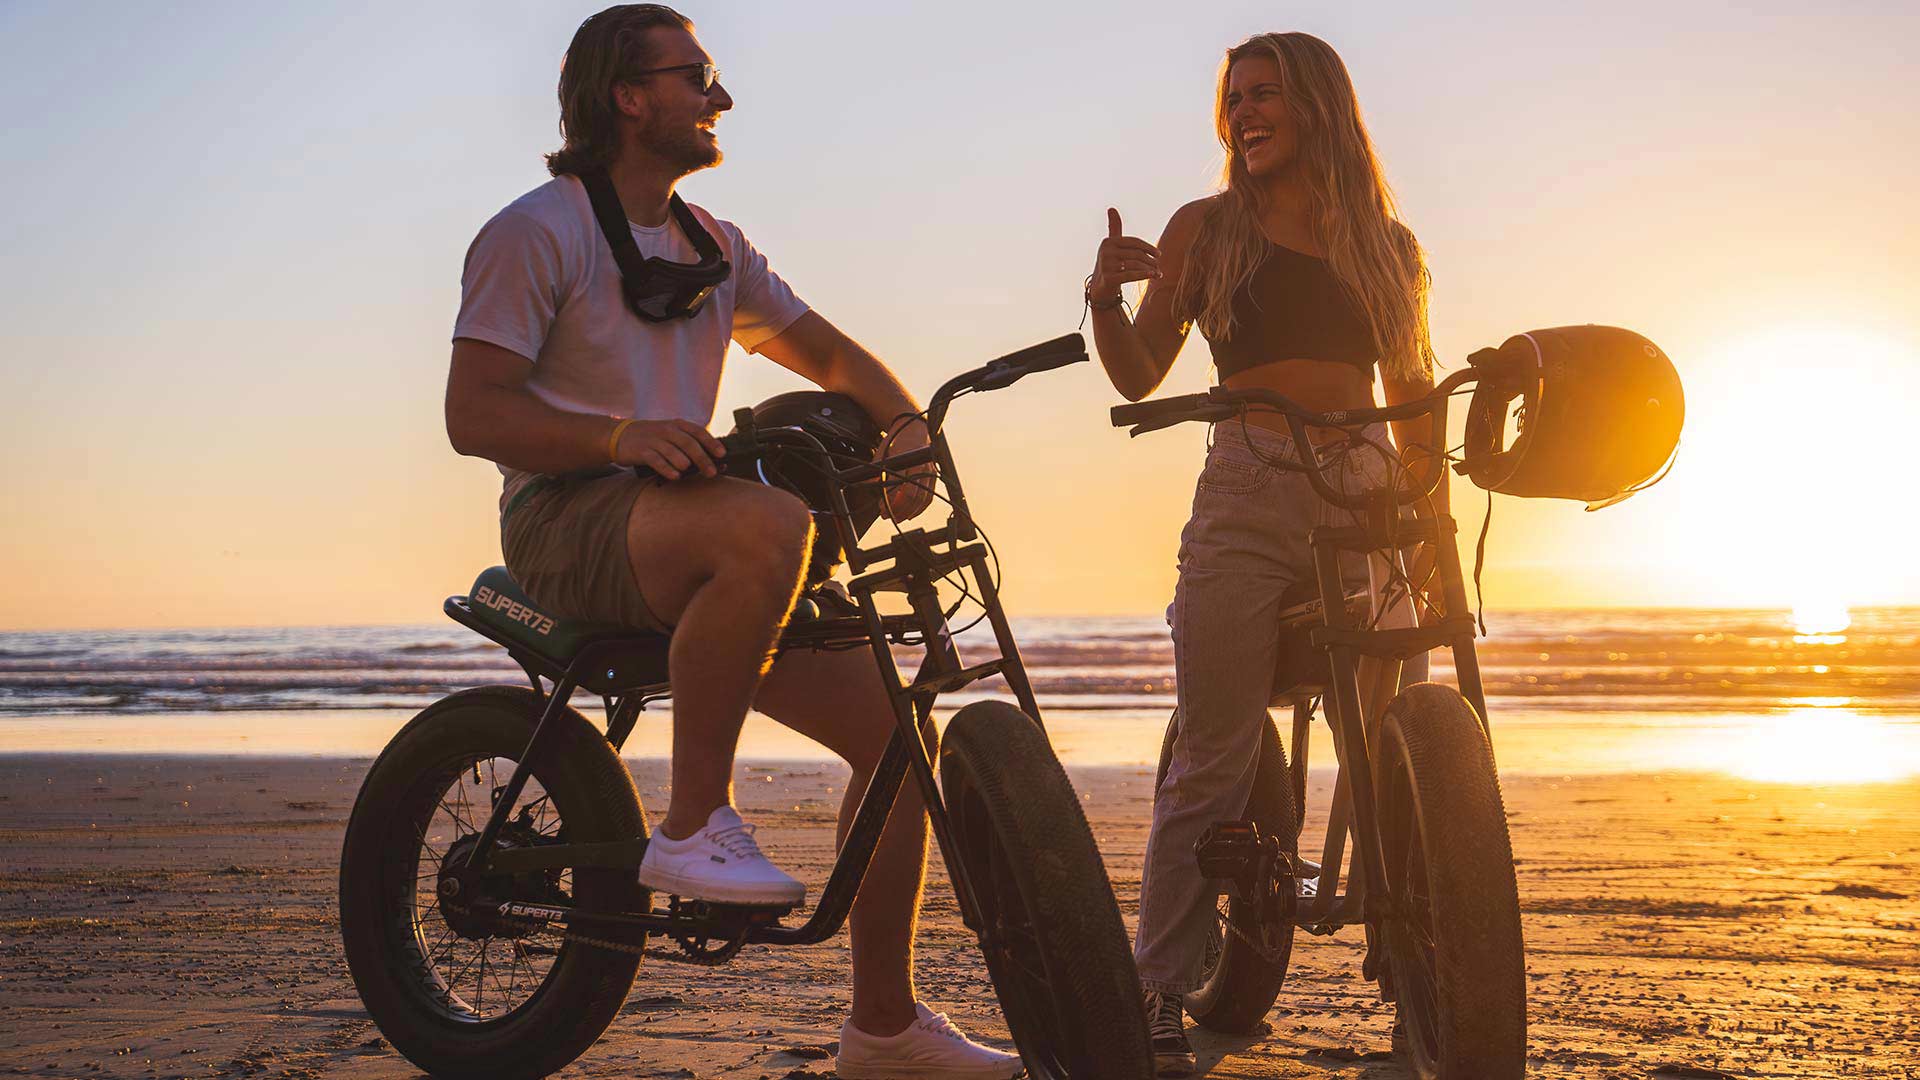 Two riders enjoying the sunset on the beach with their SUPER73 e-bikes